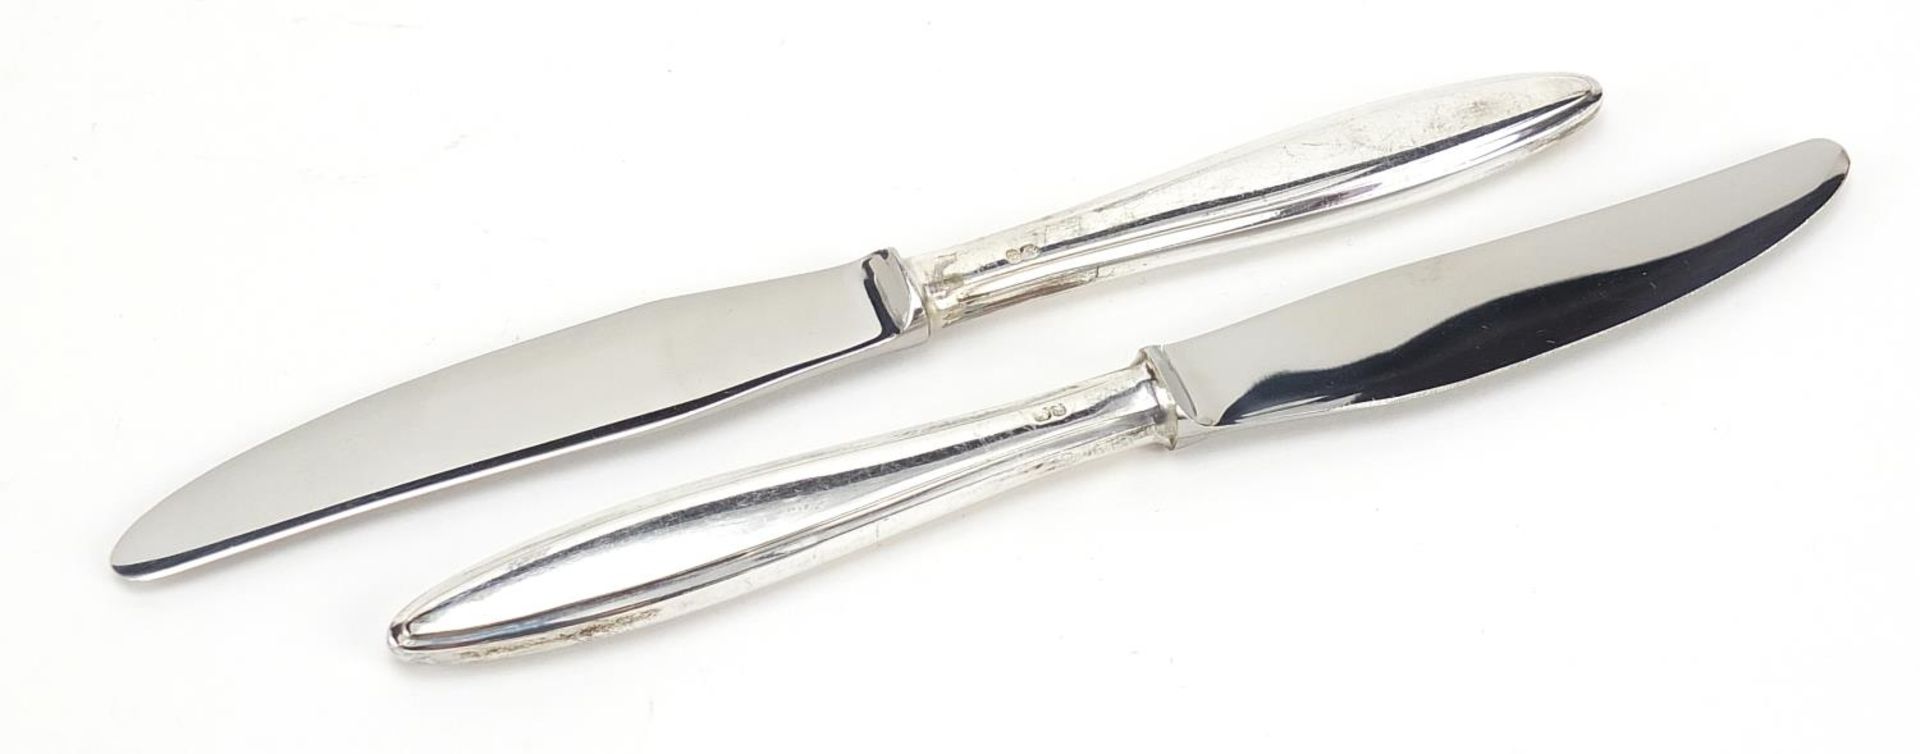 Harrods Ltd Cutlers and Silversmiths, set of six silver handled knives with stainless steel blades - Bild 4 aus 6